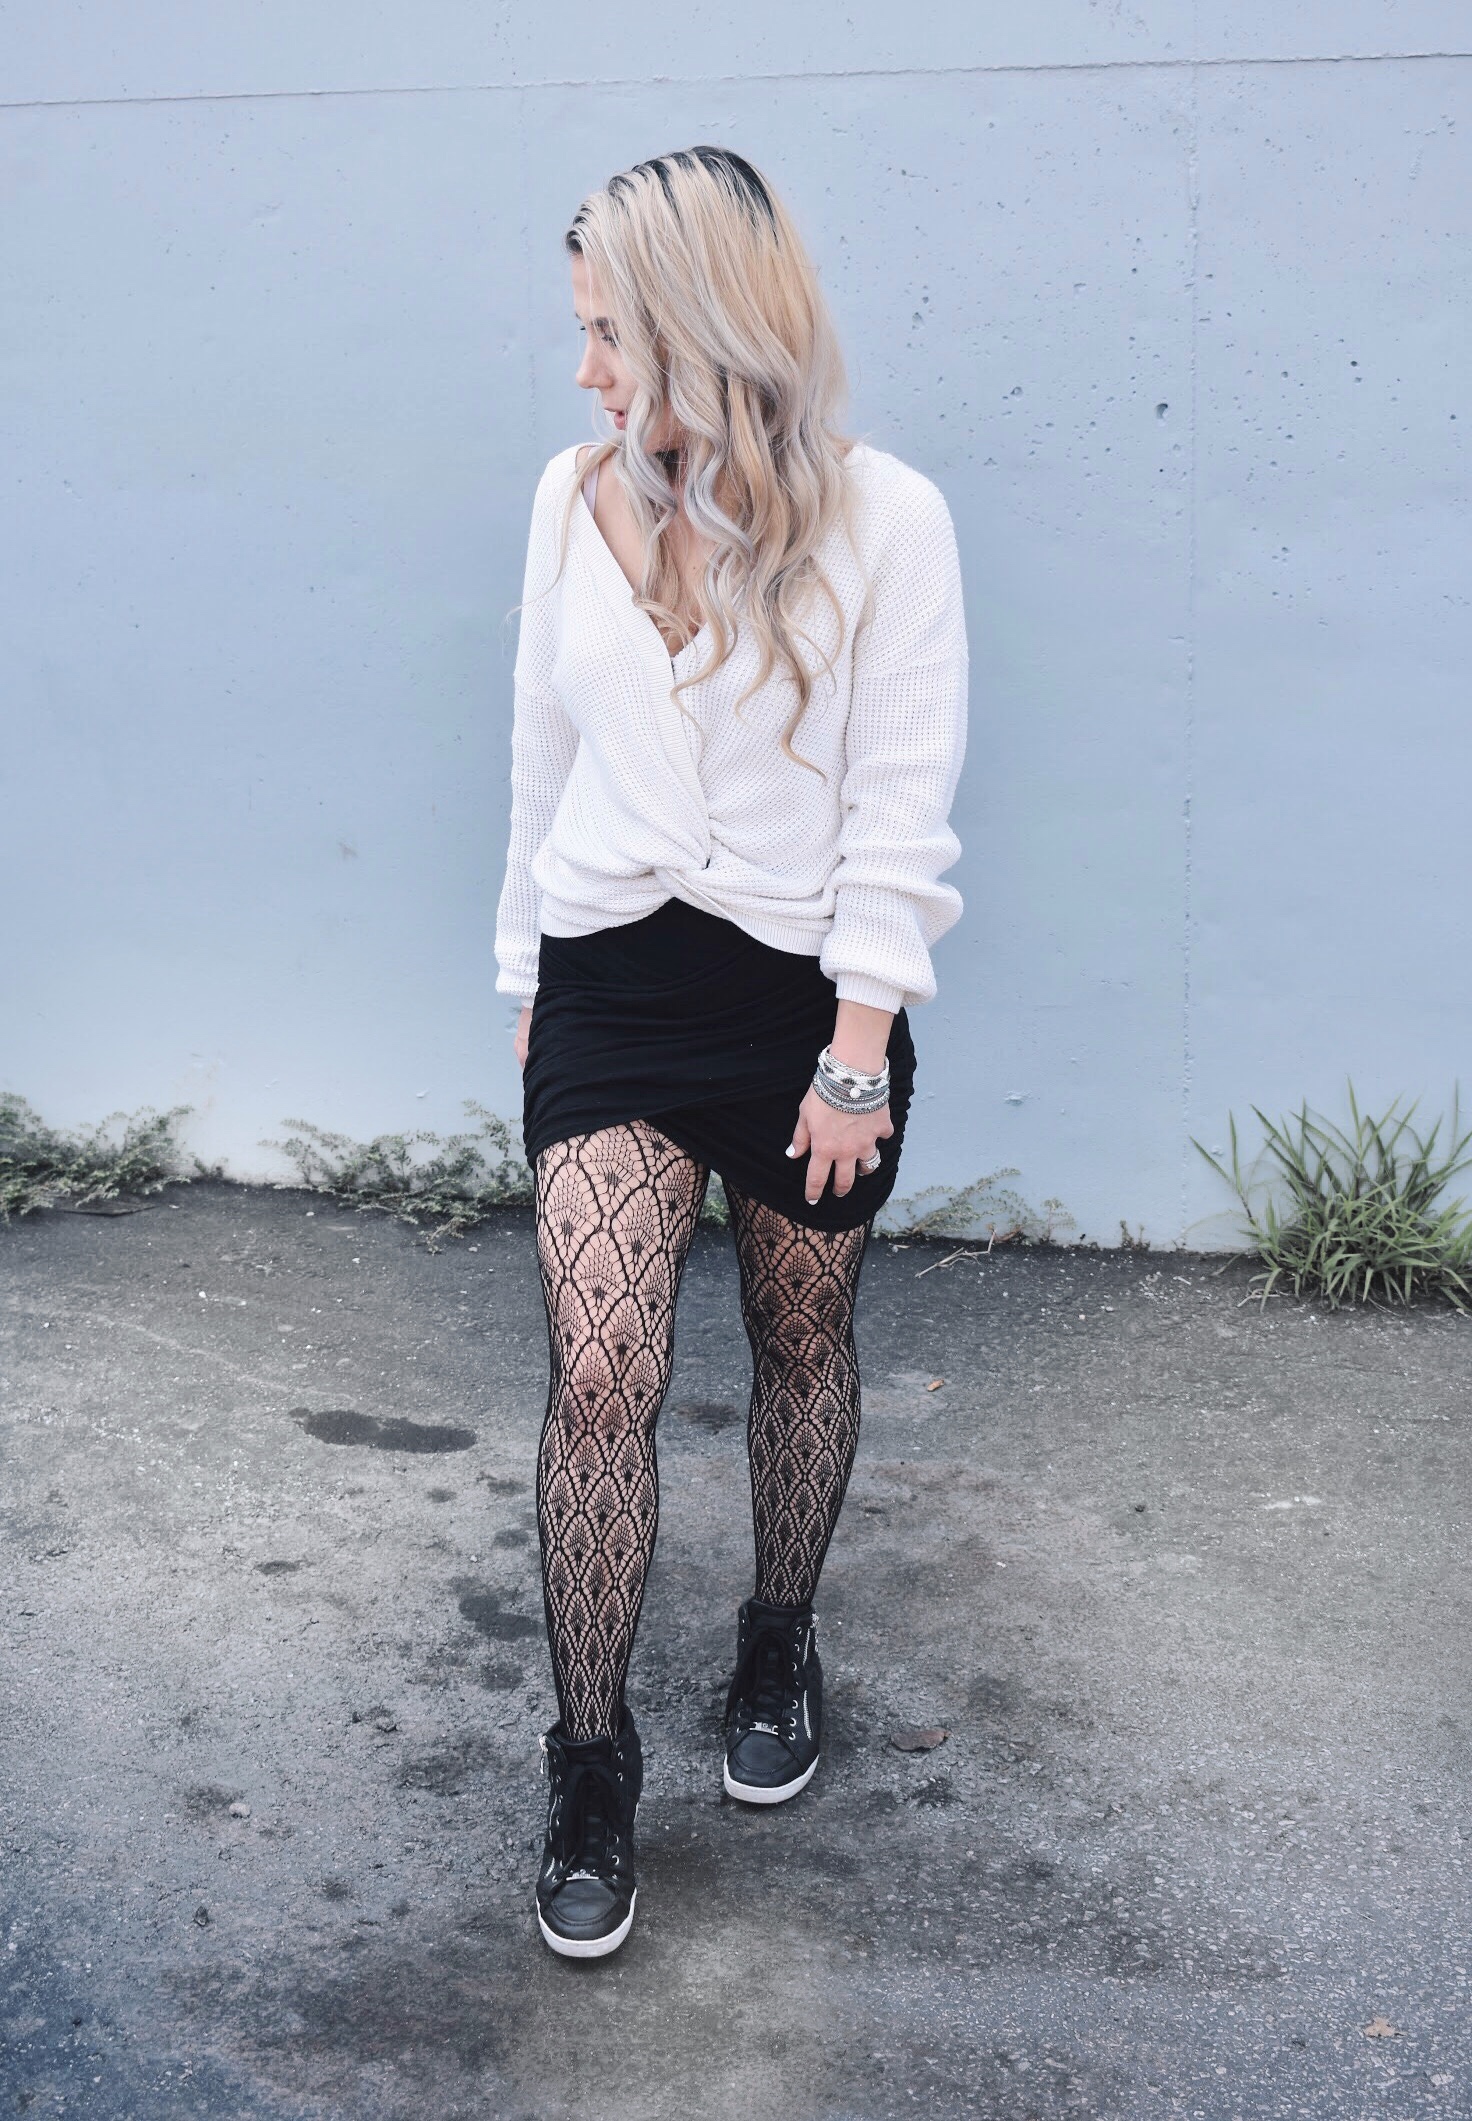 So trendy! Fishnets under jeans* totally want to try this look | Fishnet  trend, Cool outfits, Fashion outfits